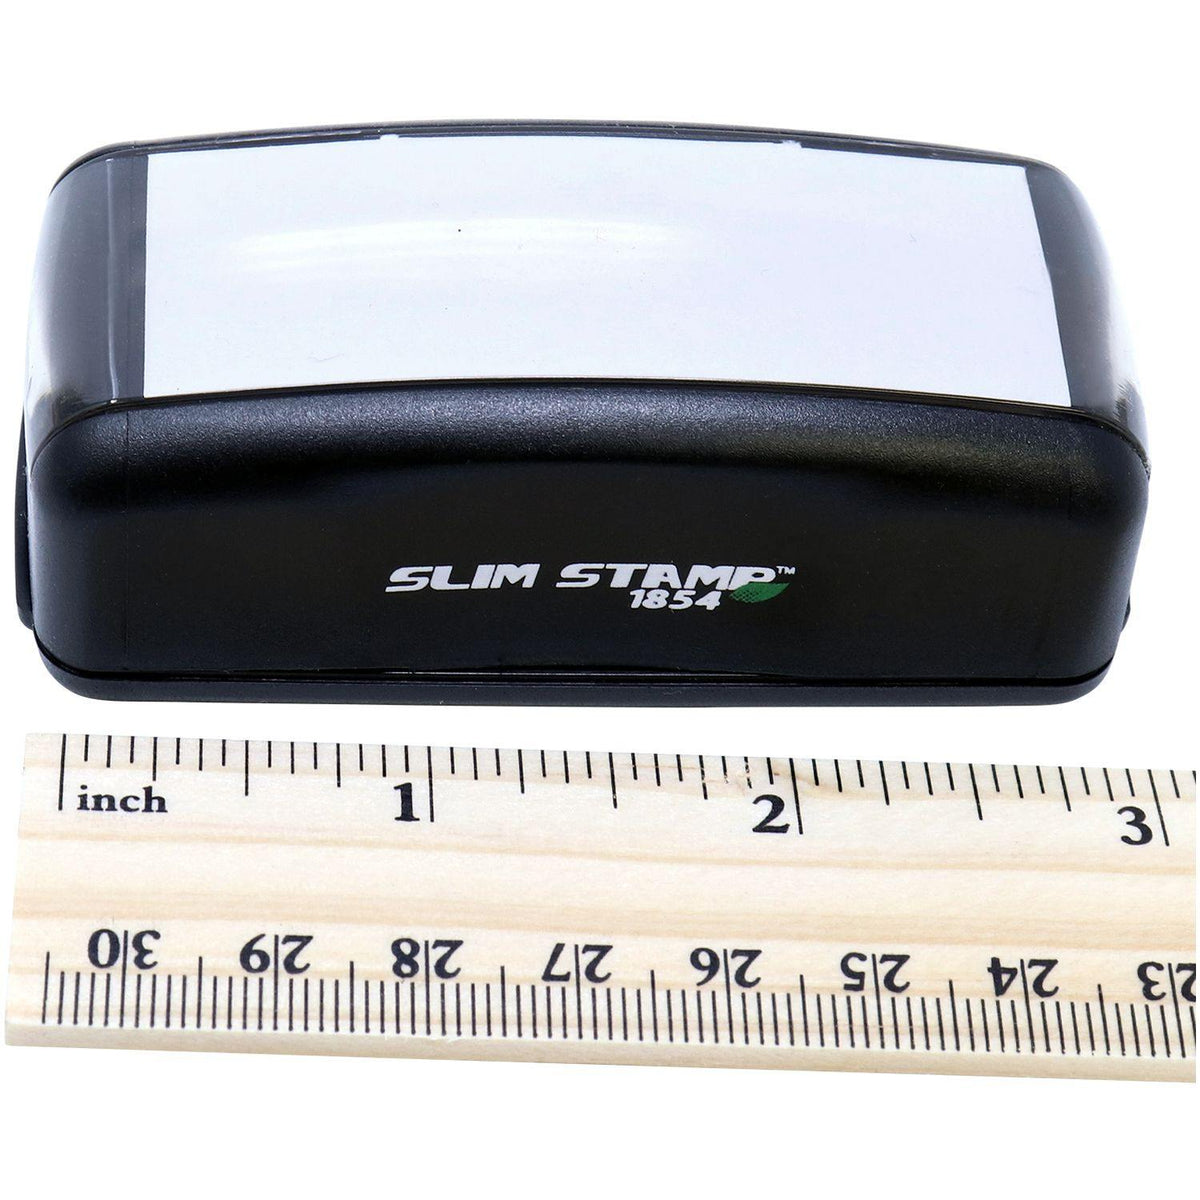 Measurement Large Pre-Inked Narrow For Deposit Only Stamp with Ruler